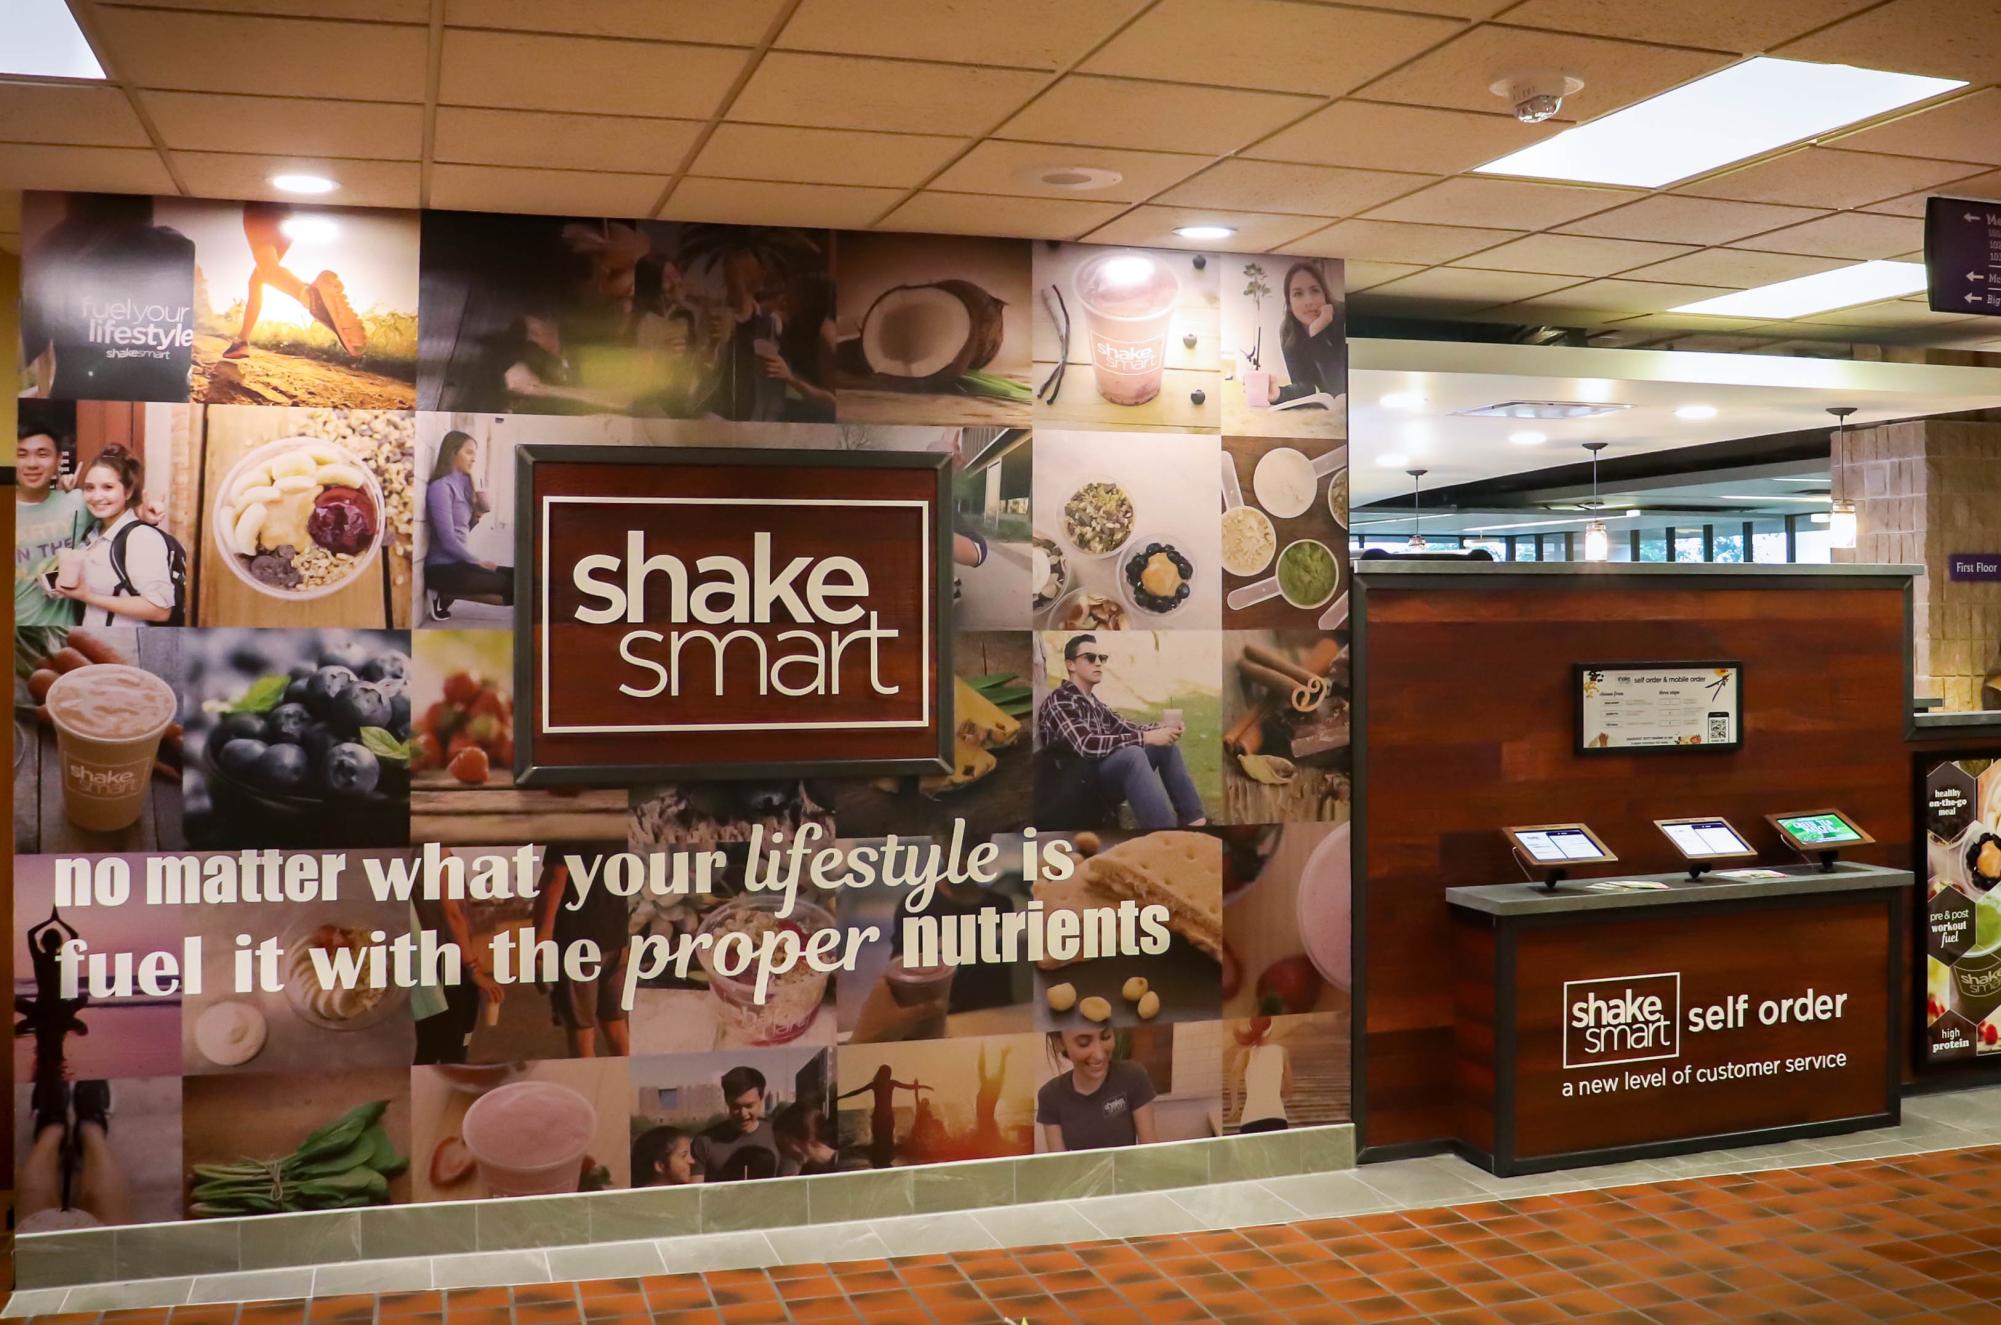 Shake Smart is already serving up smoothies students are excited about.